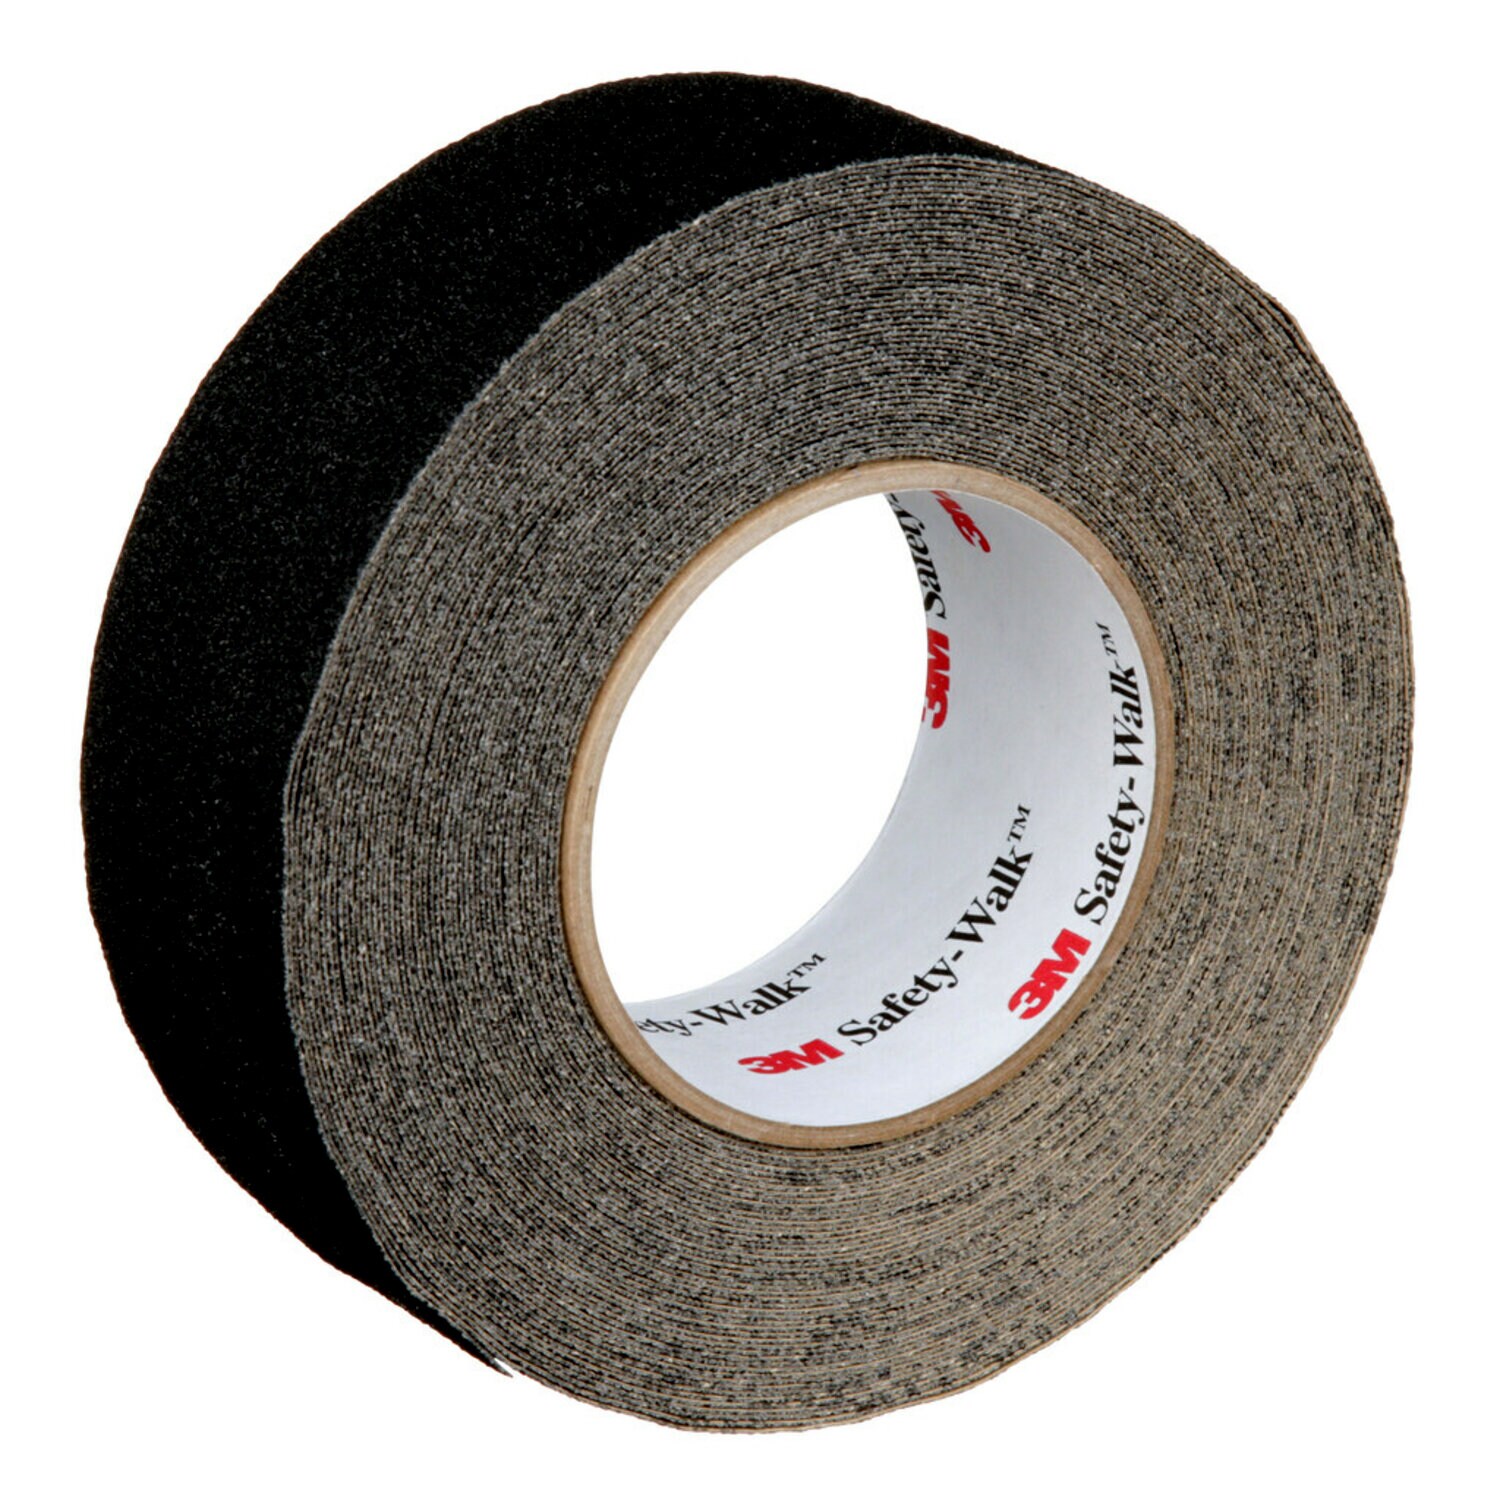 7100009880 - 3M Safety-Walk Slip-Resistant General Purpose Tapes & Treads 610,
Black, 2 in x 60 ft, Roll, 2/Case